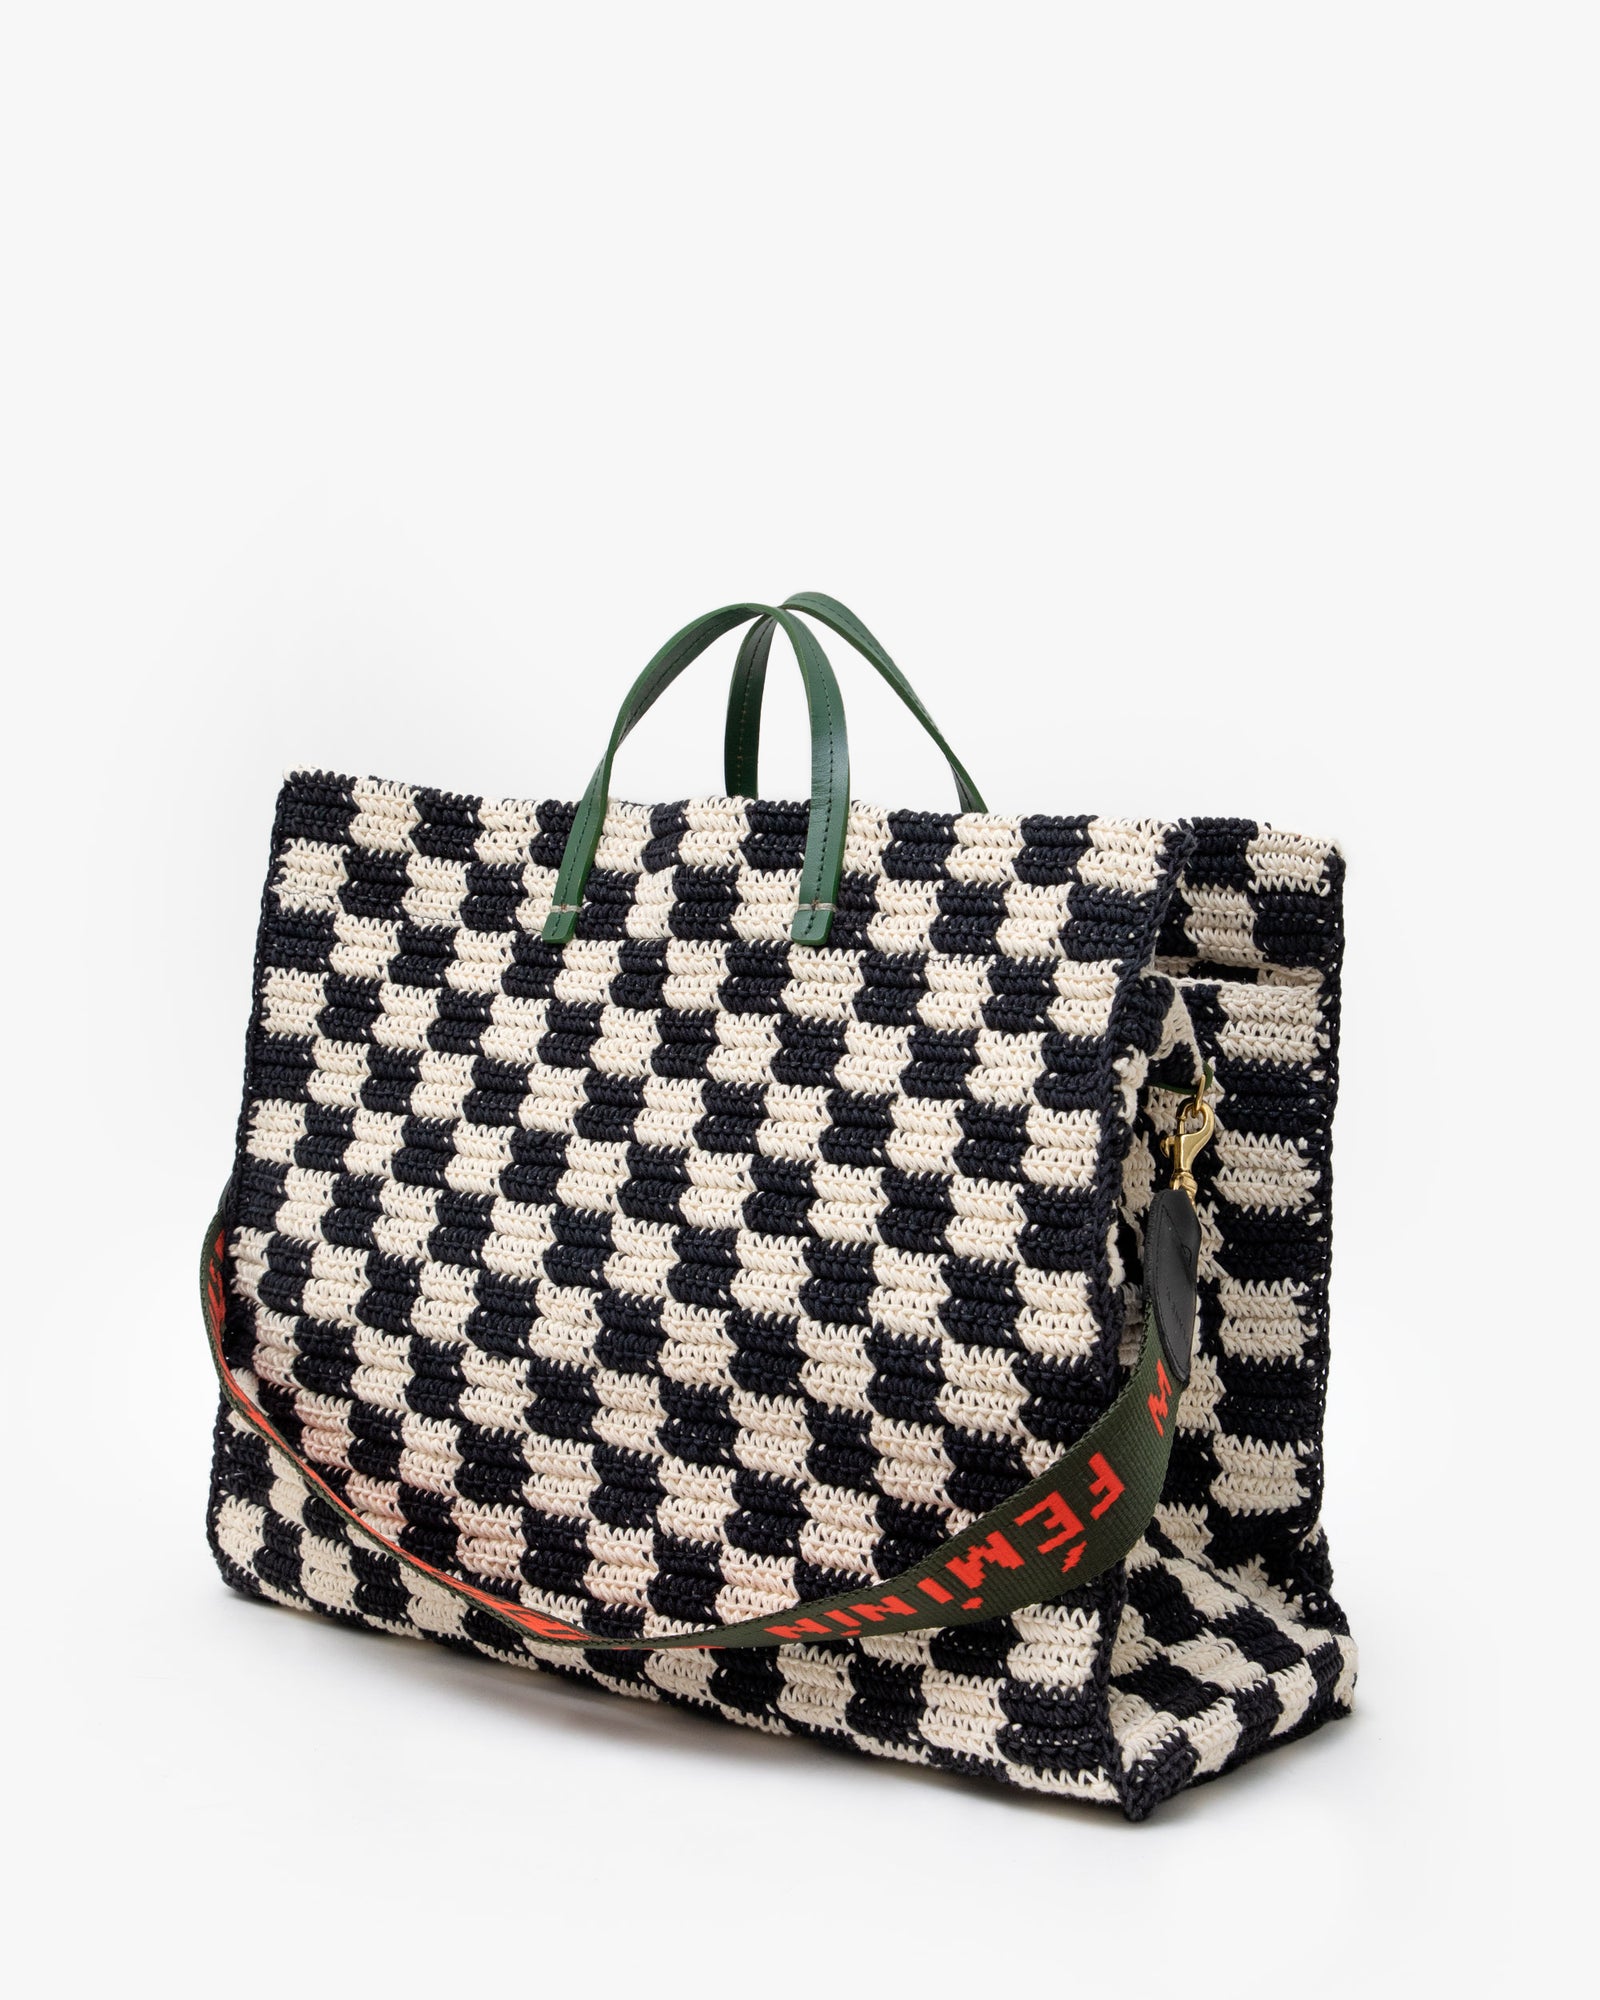 Black And White Printed Checkered cosmetic Zipper Jute Bag, Size: 7 X 5 X 4  Inch at best price in Kolkata